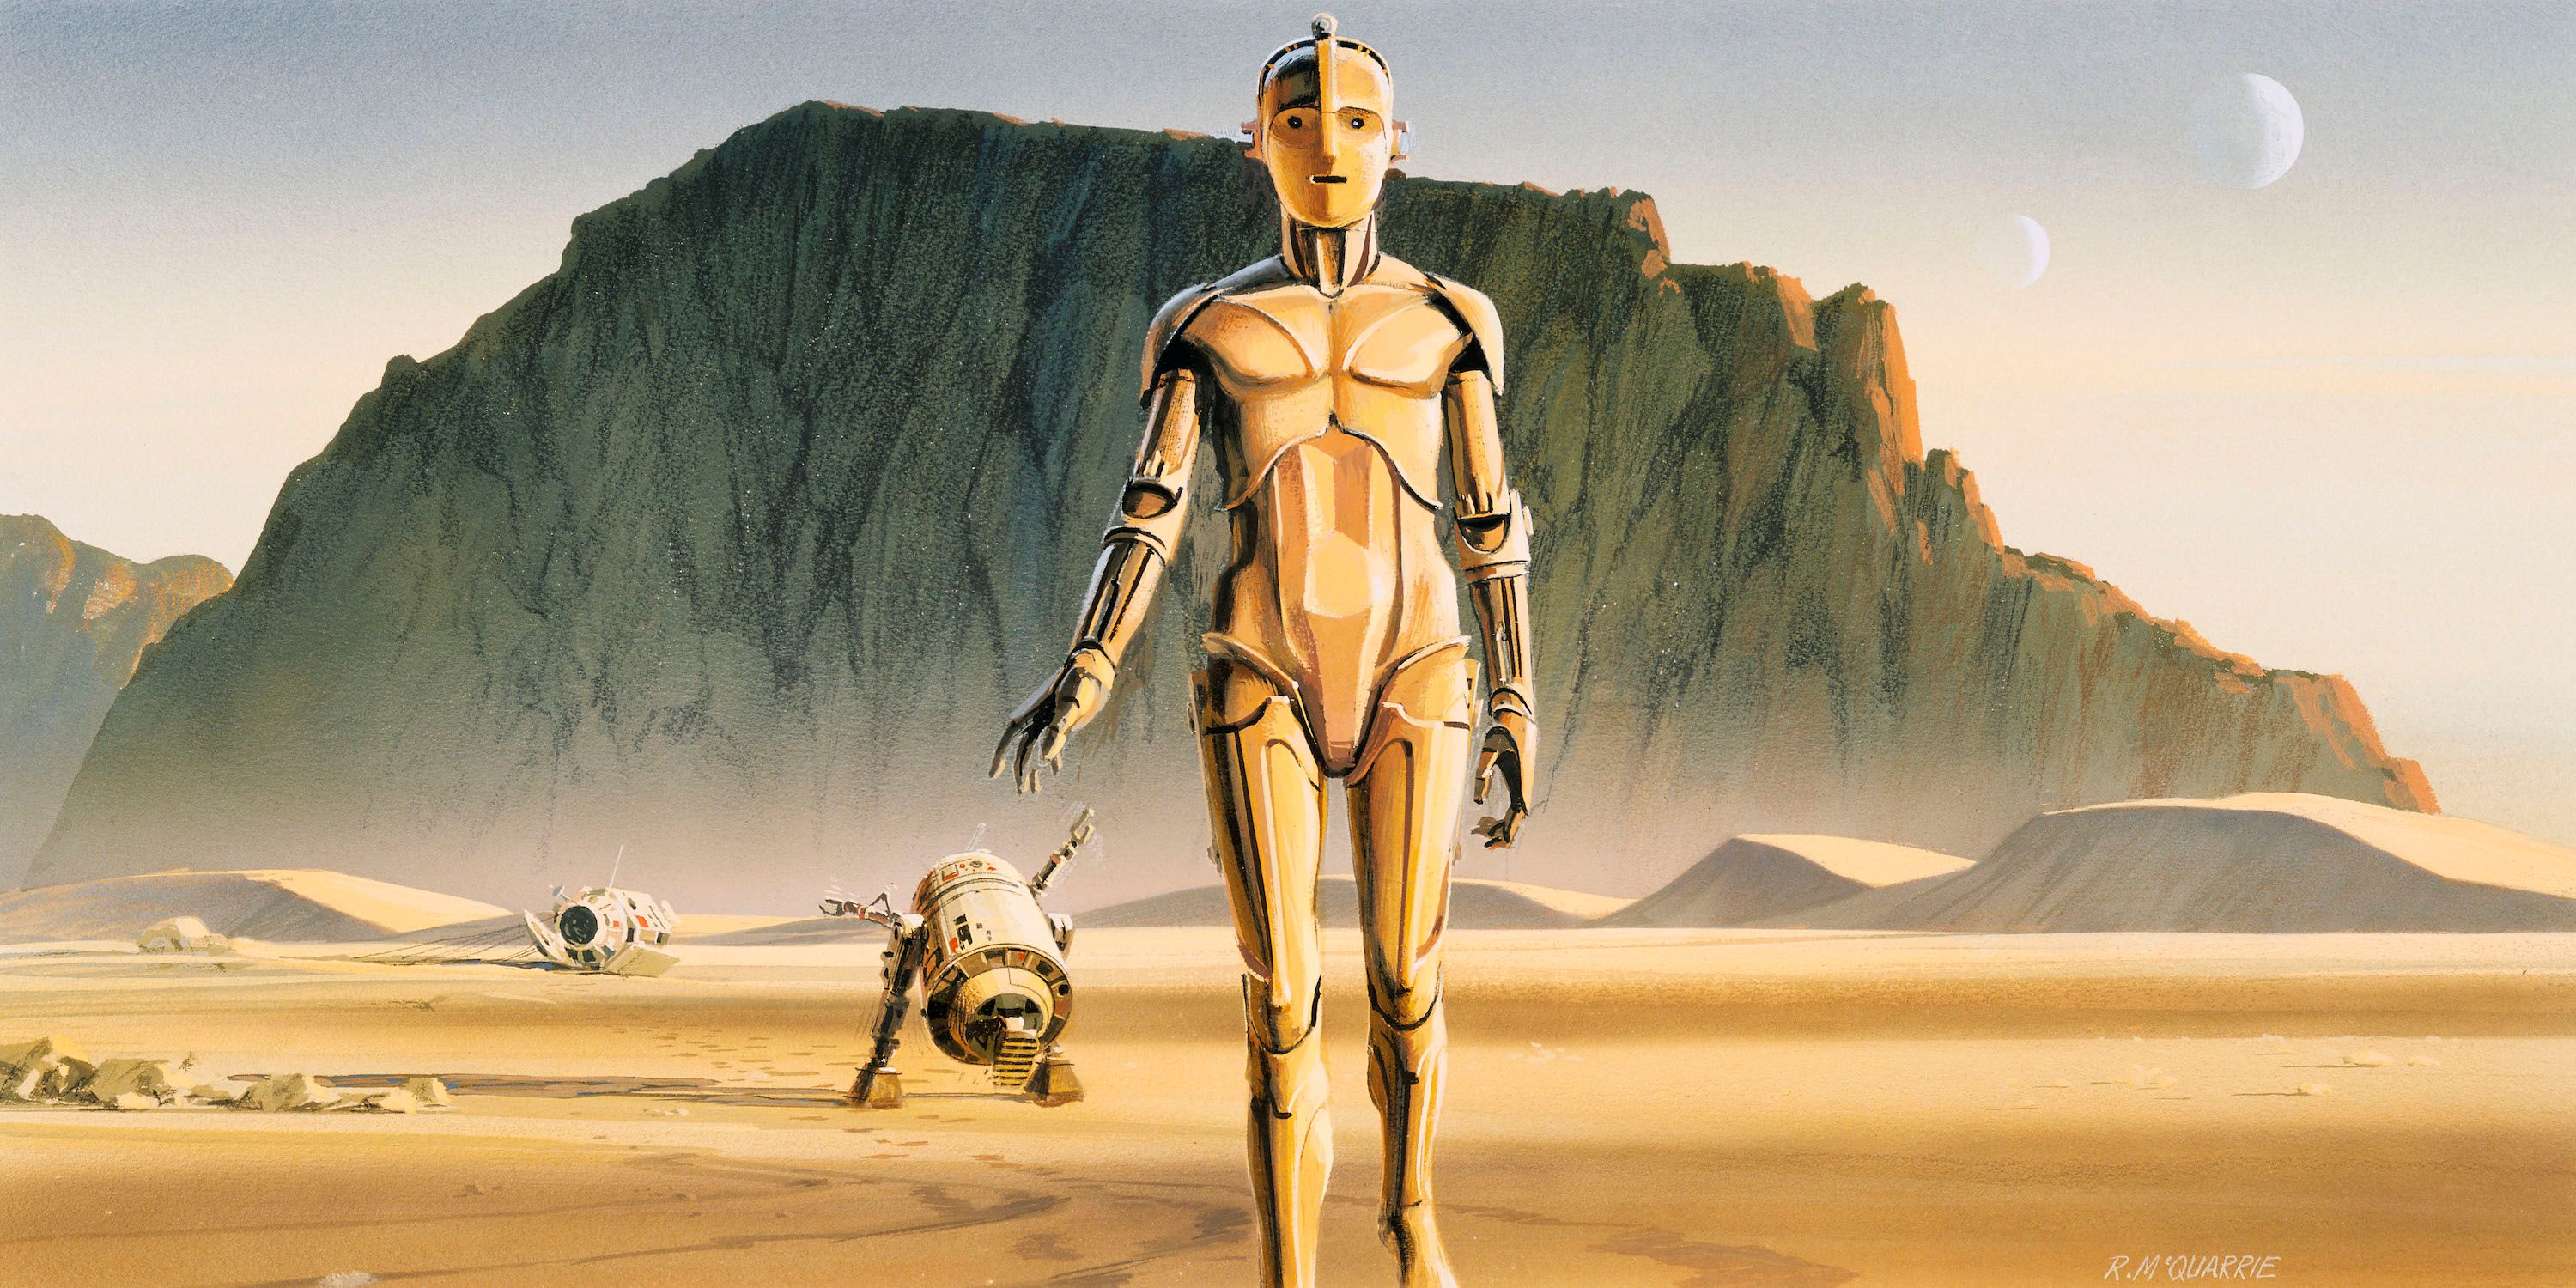 Ralph McQuarrie early concept art of C-3PO and R2-D2